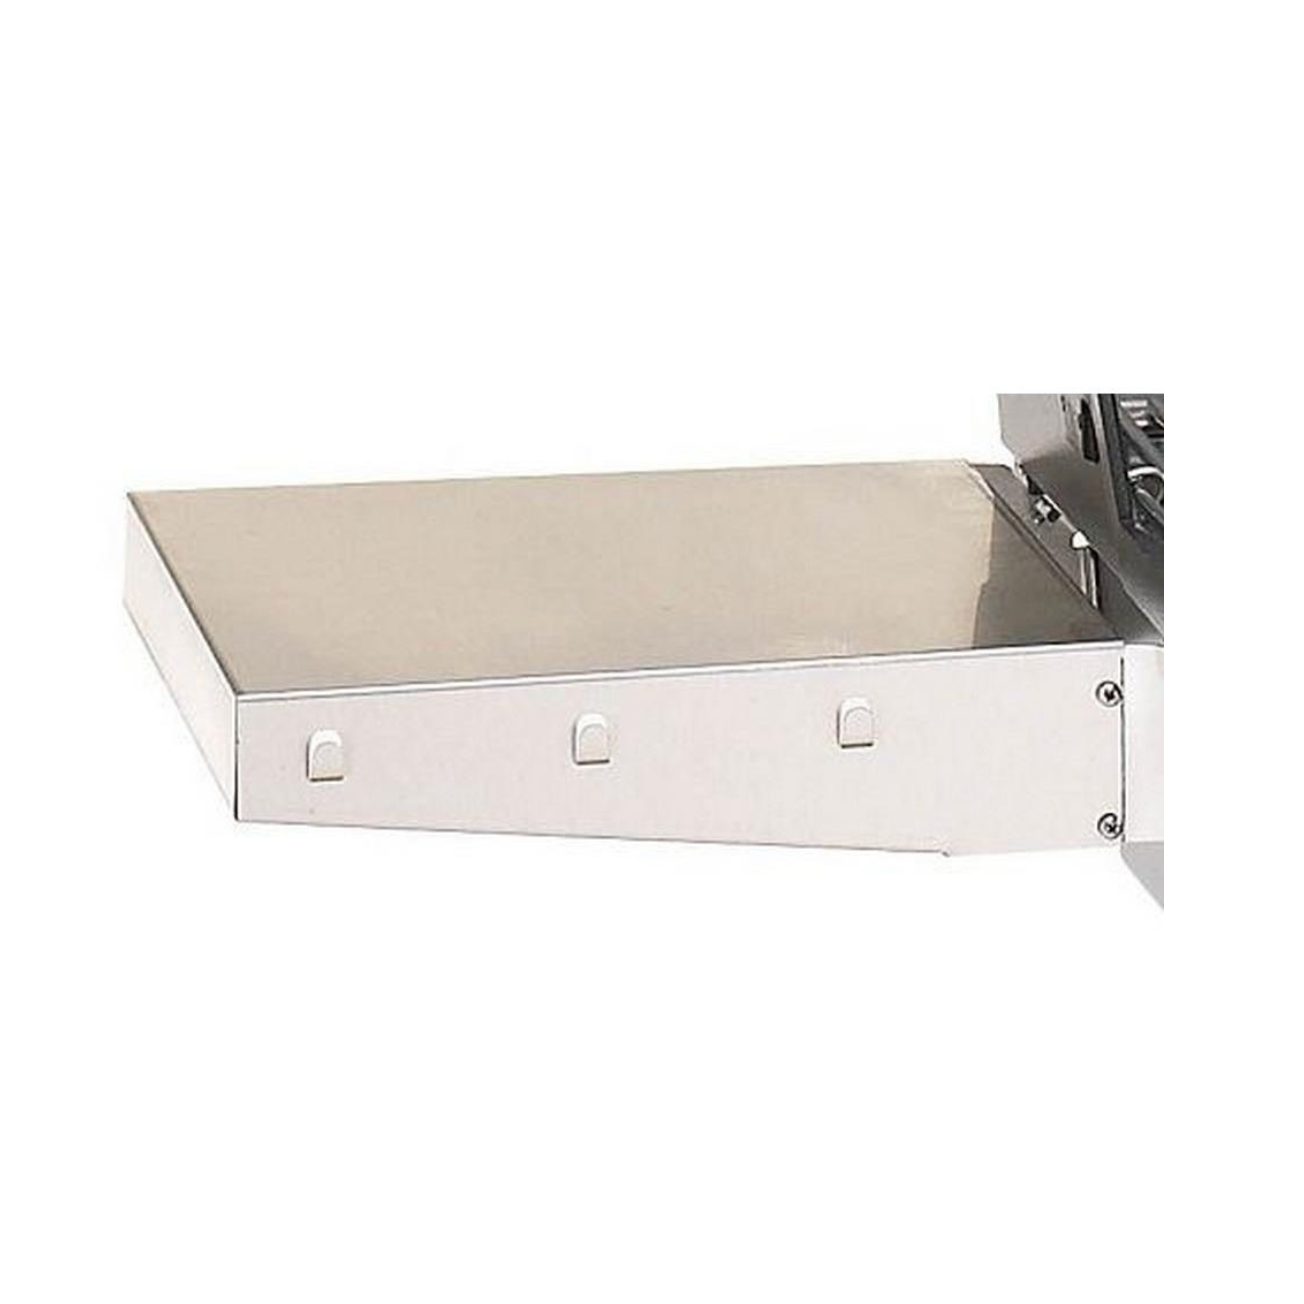 PGS Stainless Steel Shelf for "A" Series Grills